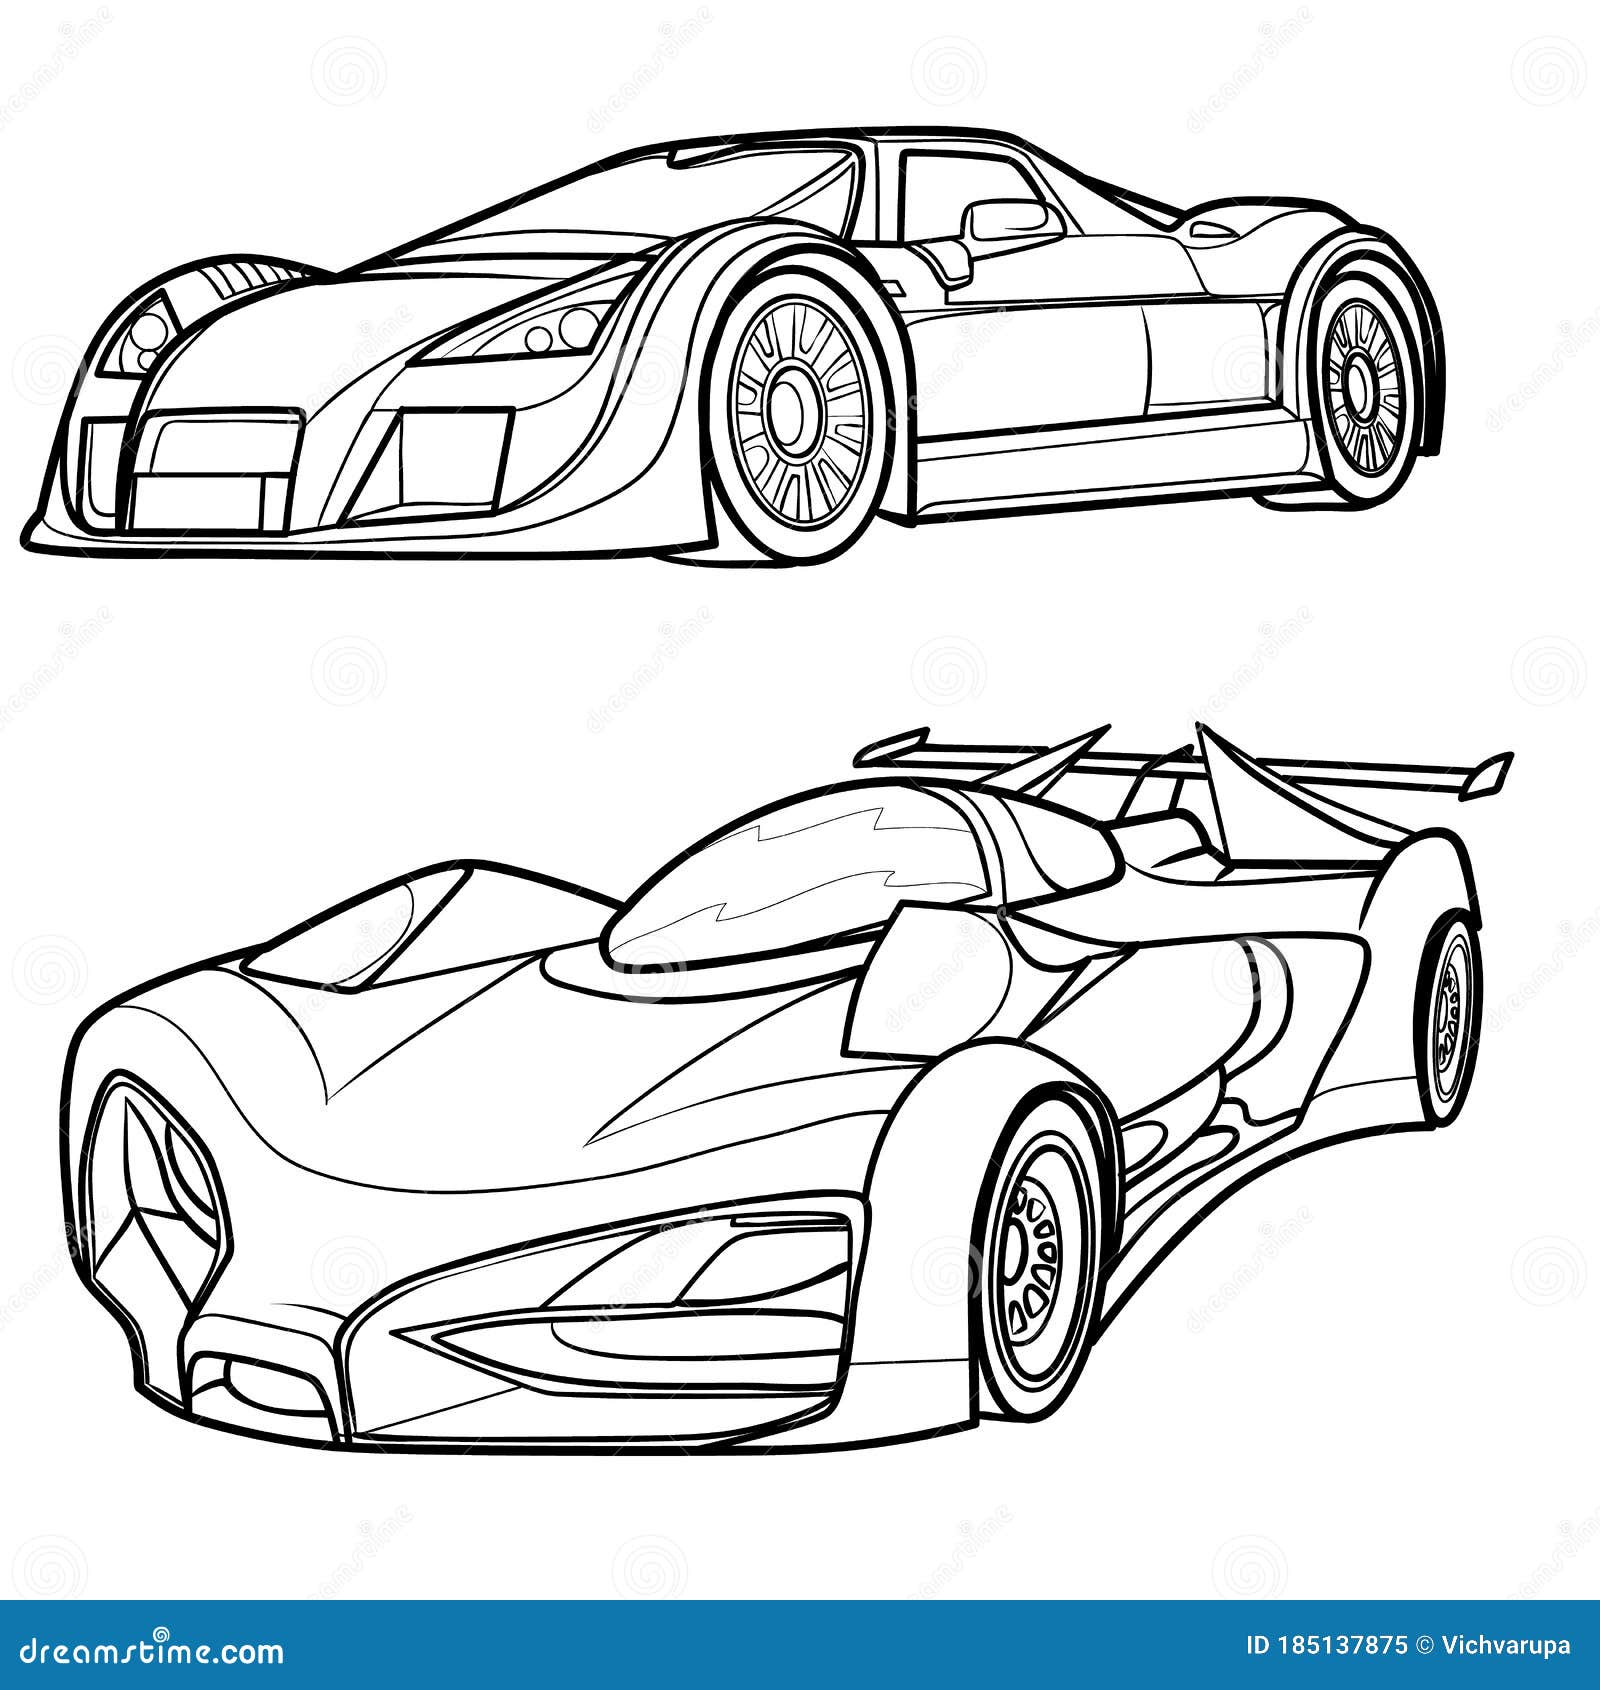 Set Of Sports Car Sketches, Coloring Book, Isolated Object On White